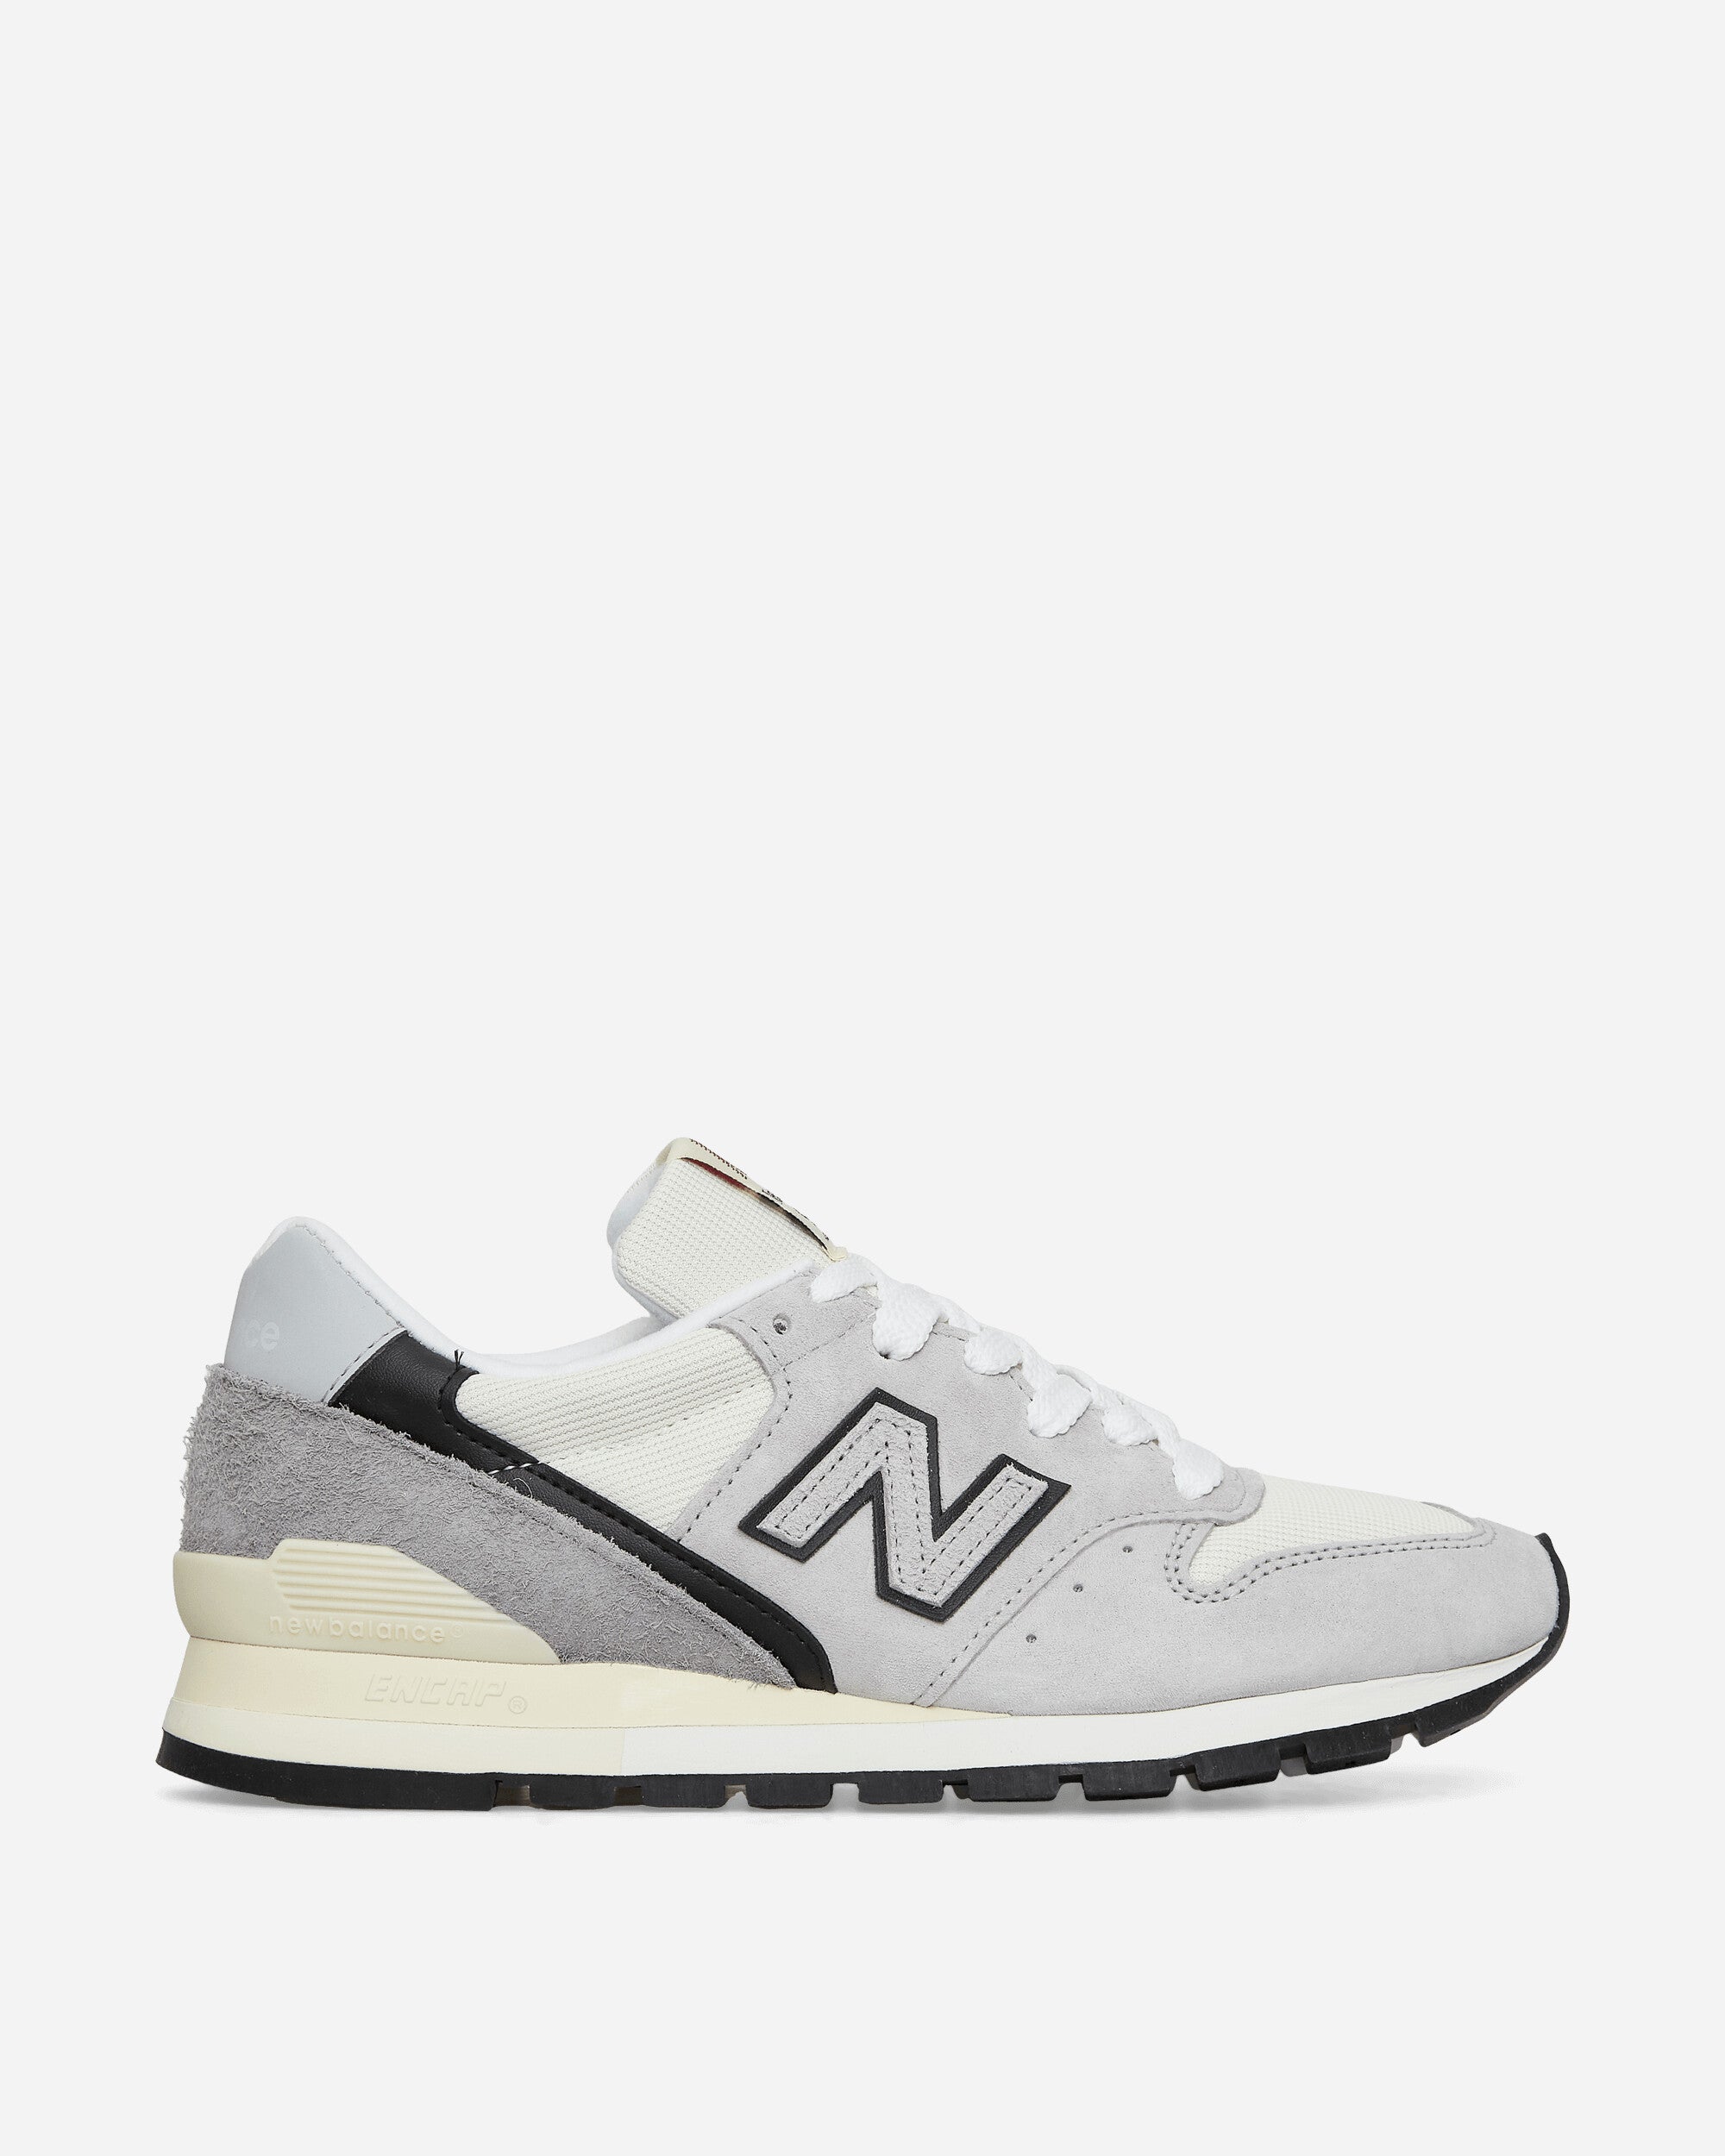 New Balance Made in USA 996 Sneakers Grey / Black - Slam Jam® Official ...